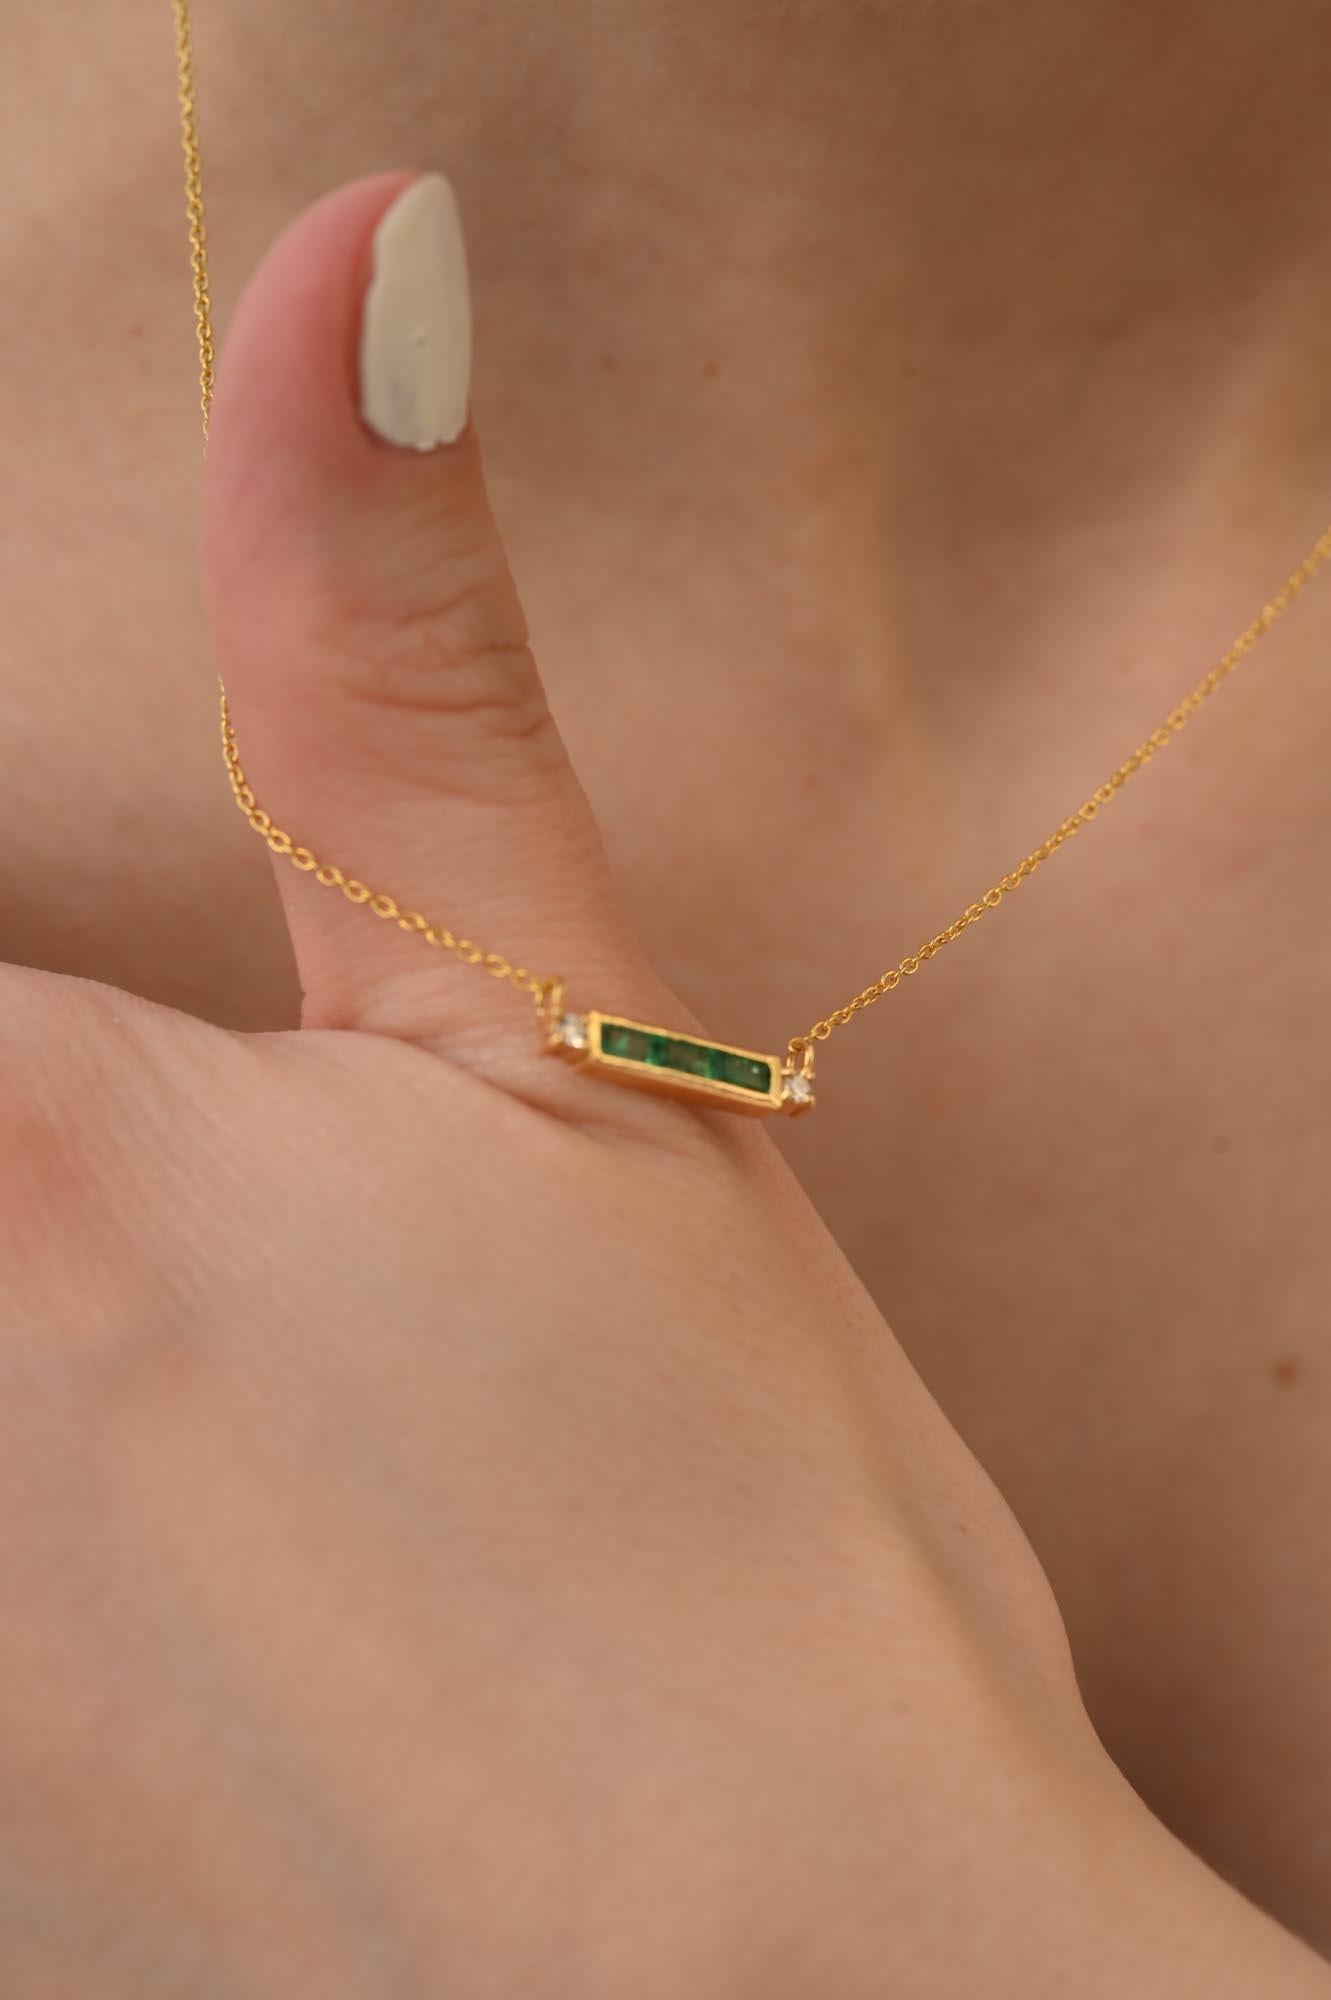 14k Solid Yellow Gold Diamond Emerald Baguette Bar Necklace, Thank You Gift In New Condition For Sale In Houston, TX